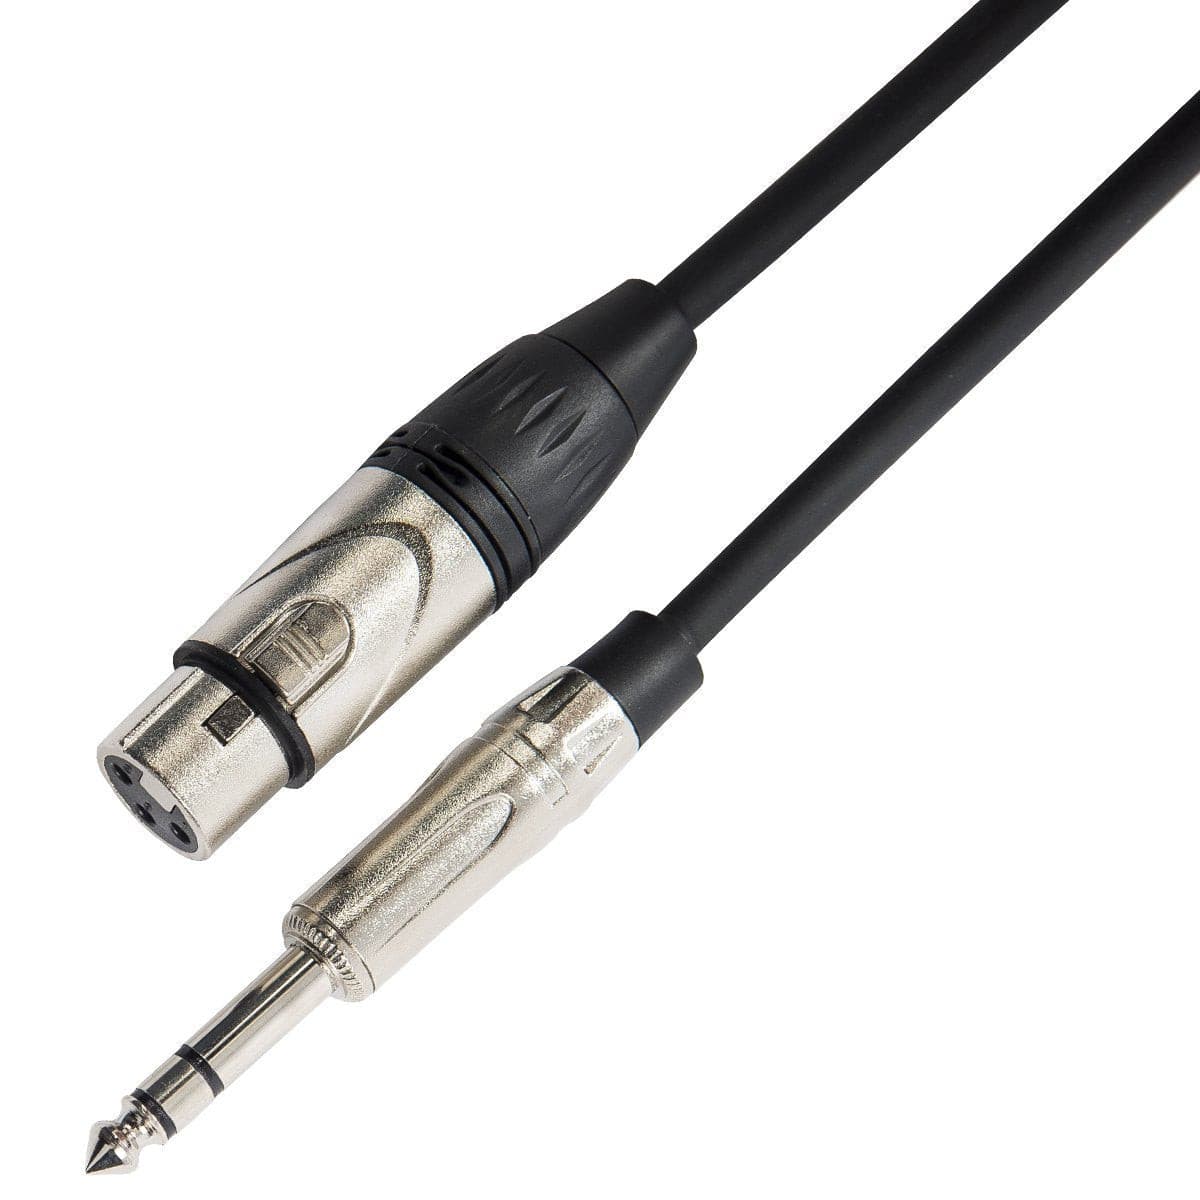 Kinsman Deluxe Stereo Microphone Cable - 20ft/6m, Cables, Microphones & Headphones for sale at Richards Guitars.